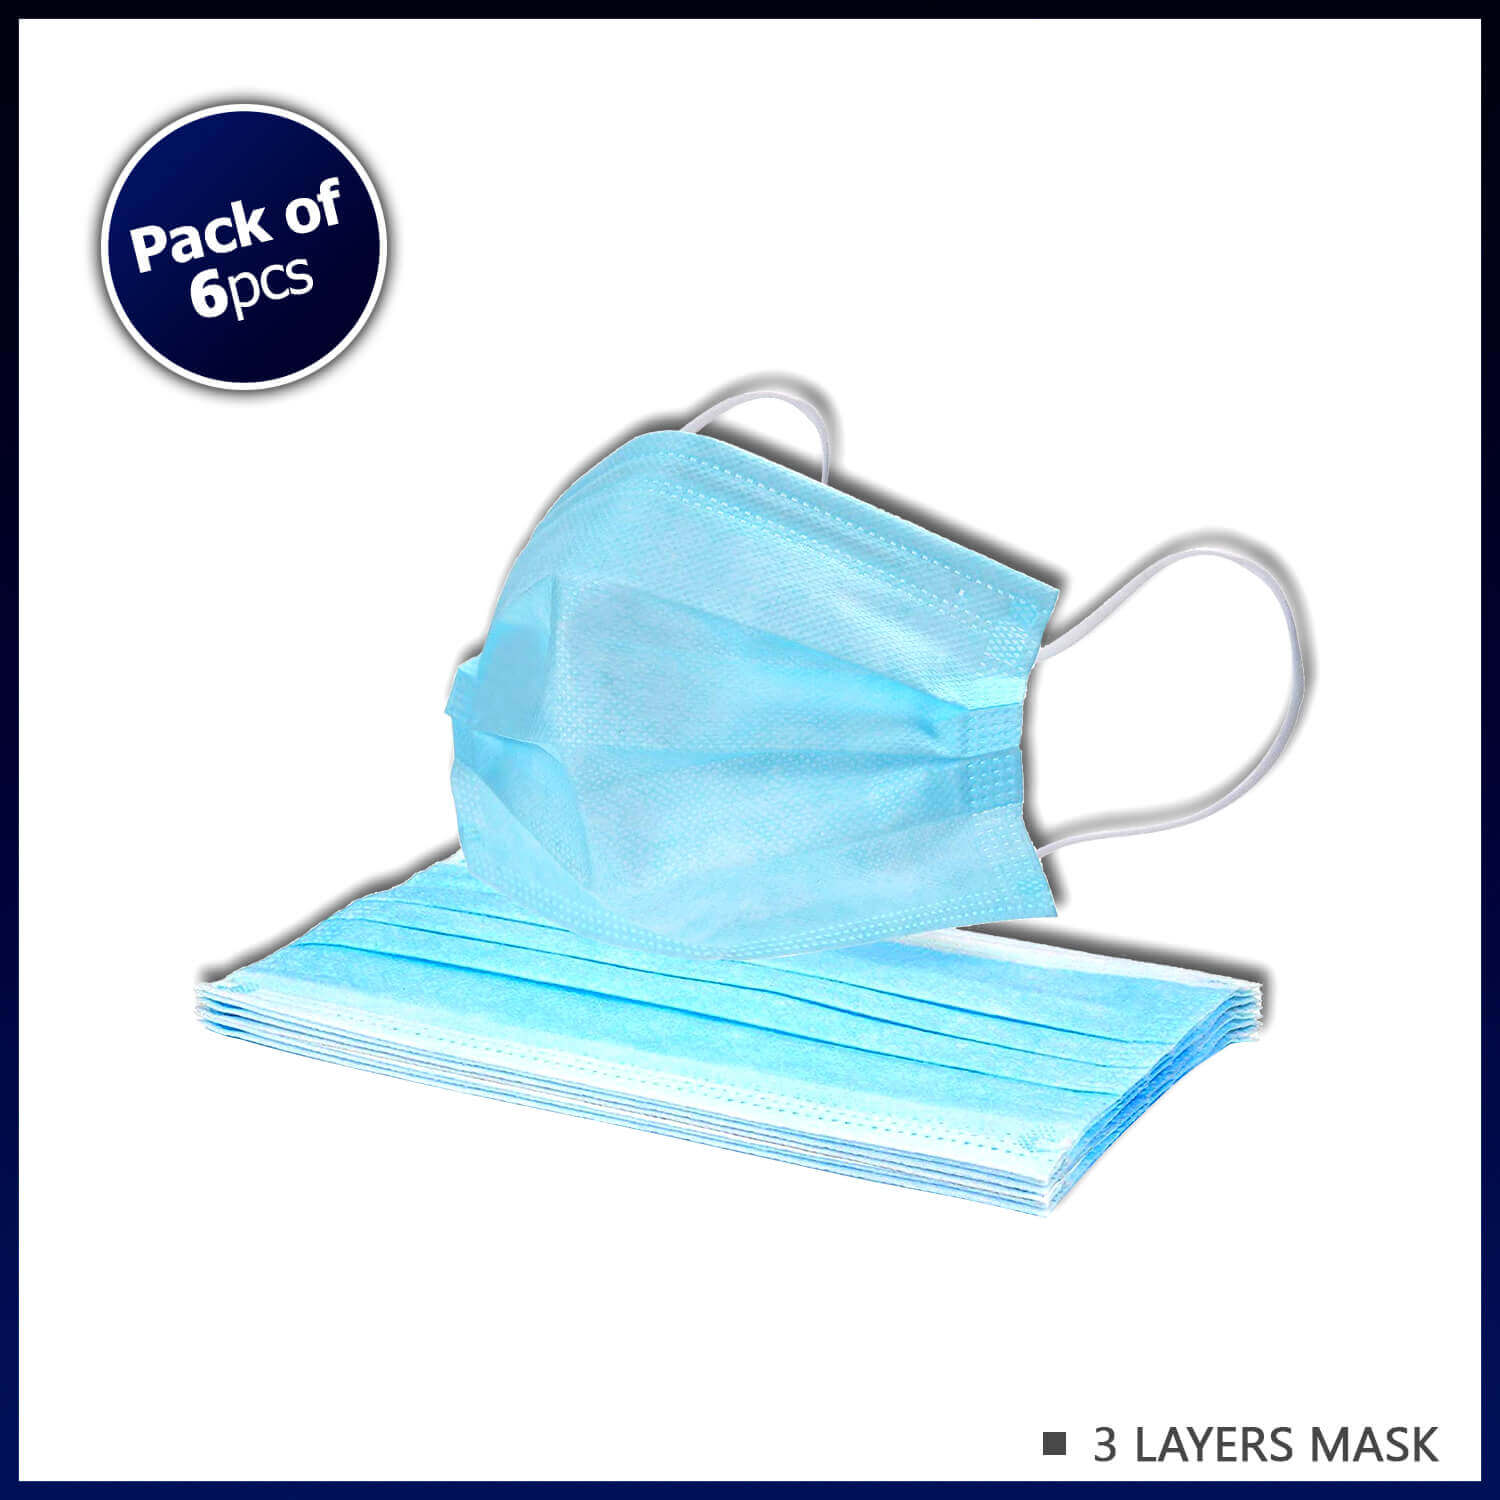 6 Pcs 3 Layer Filter Surgical Face Mask With Nose Pin/